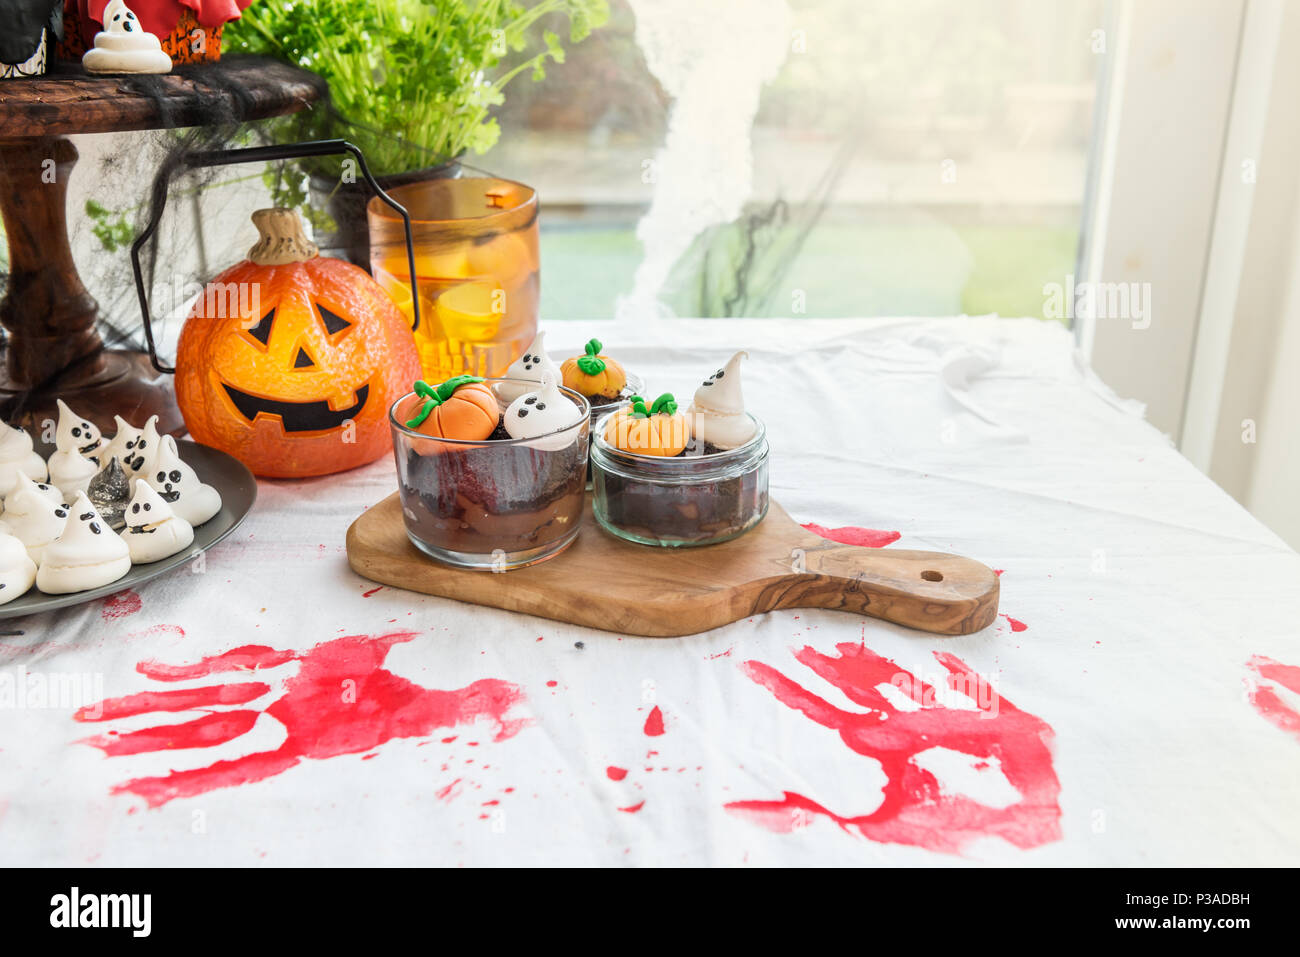 Table Set for Halloween Dinner with lots of Sweets, Pumpkin,  Jack-o-Lantern, Cupcakes, Cookies, Bloody Jelly, Spiders, Web and other  Halloween related Stock Photo - Alamy